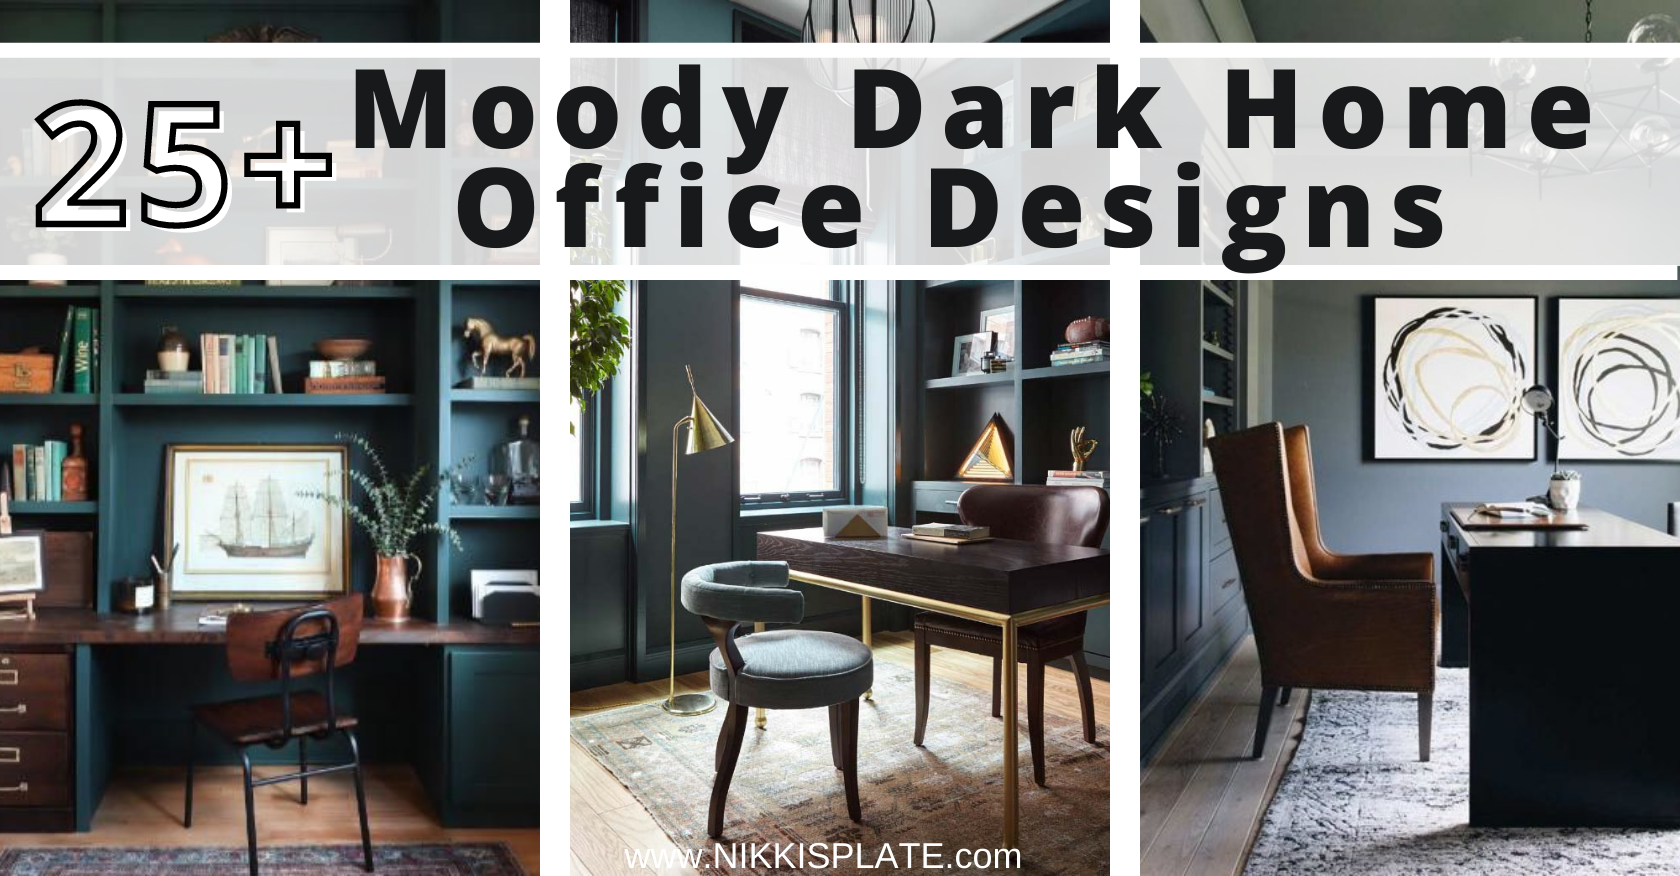 Home Office Decor Ideas Under $100  Home office decor, Home office  accessories, Chic office decor